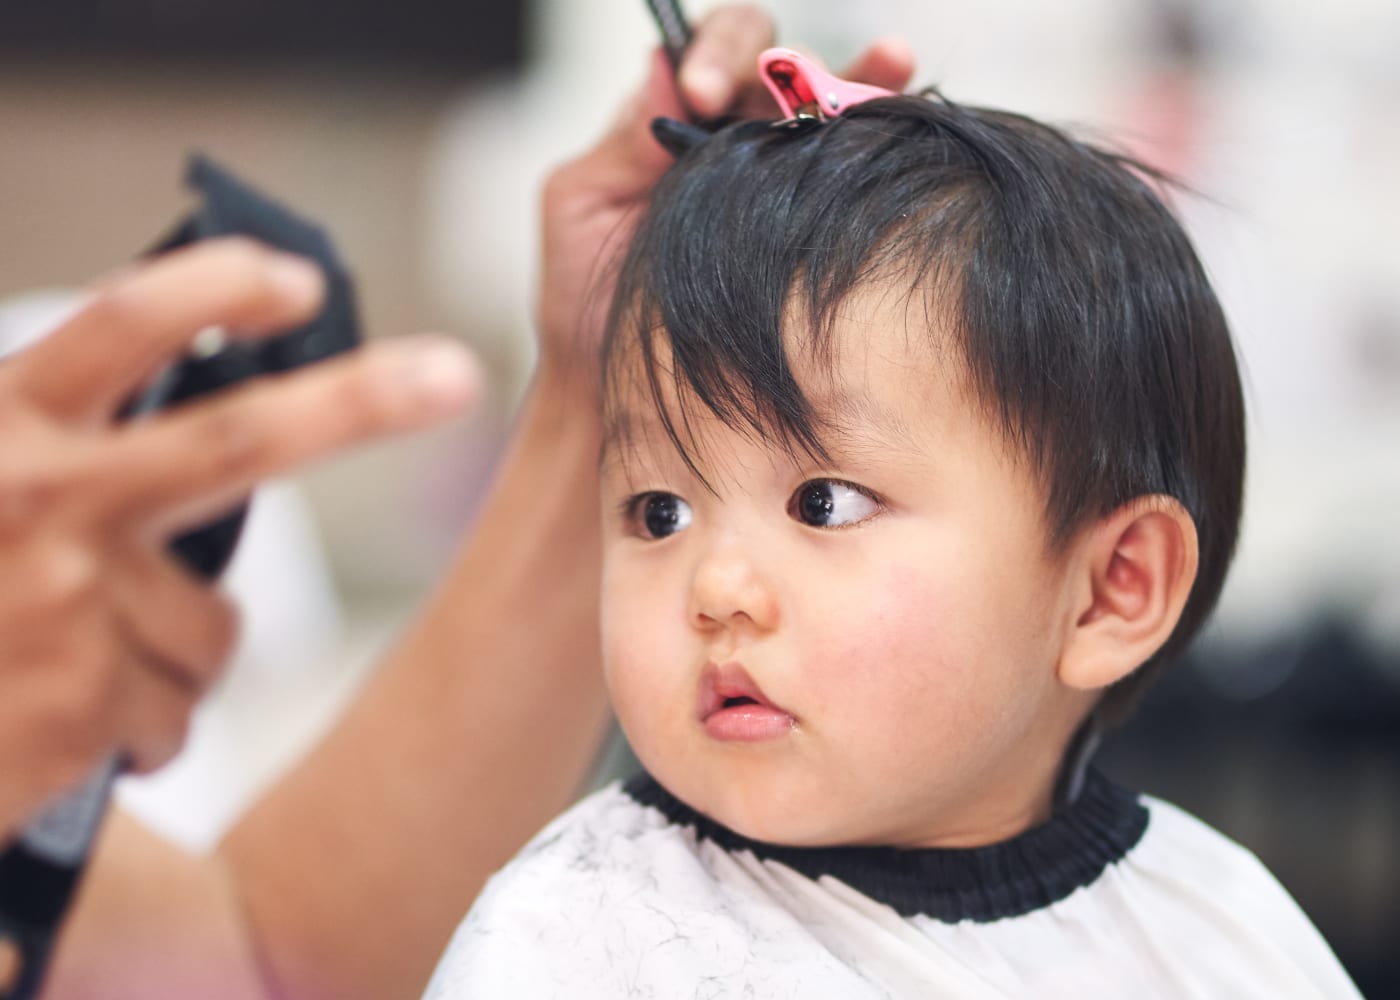 Cutting the front hair for children